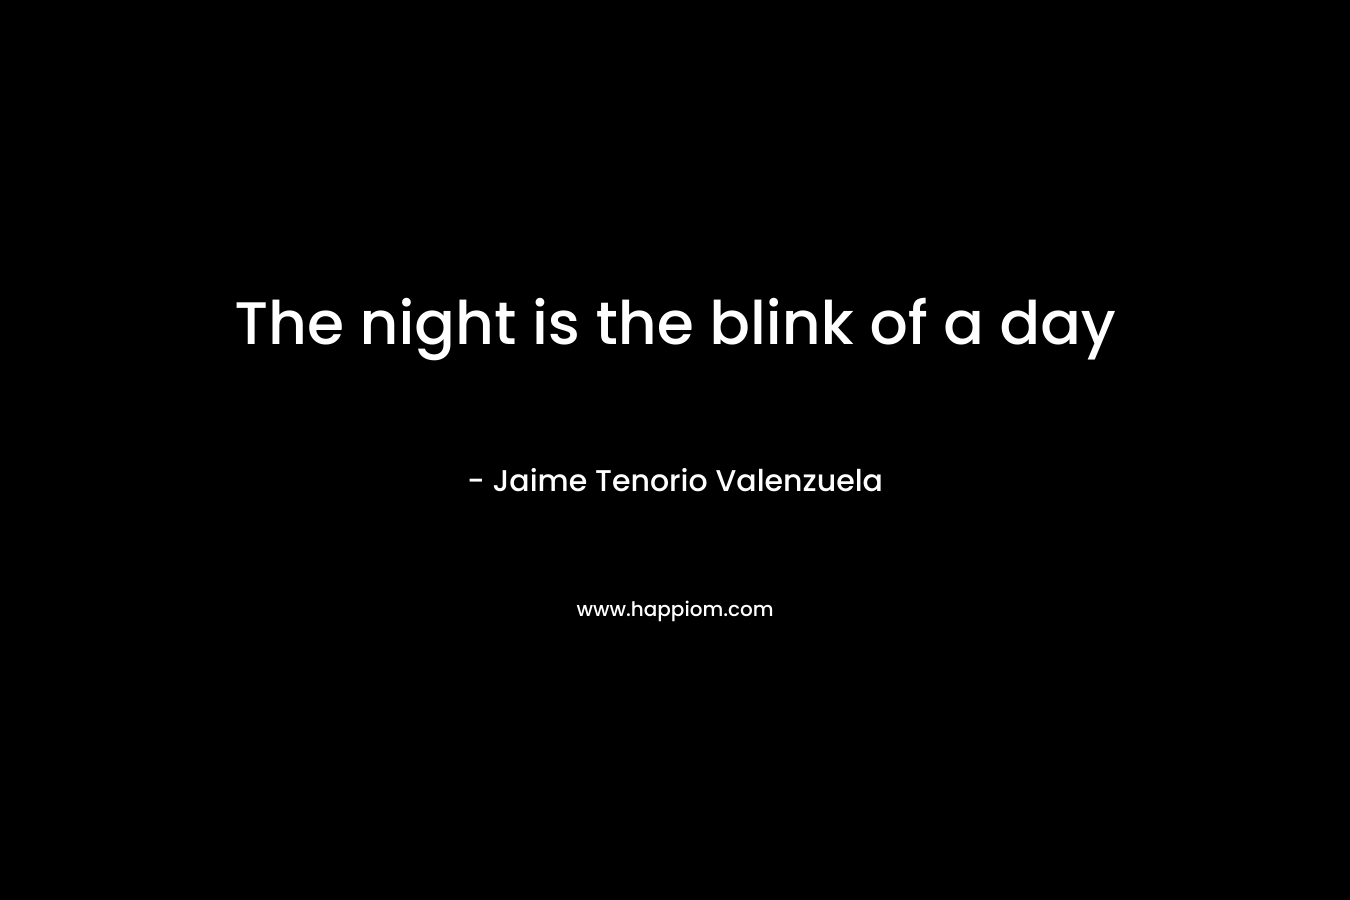 The night is the blink of a day – Jaime Tenorio Valenzuela